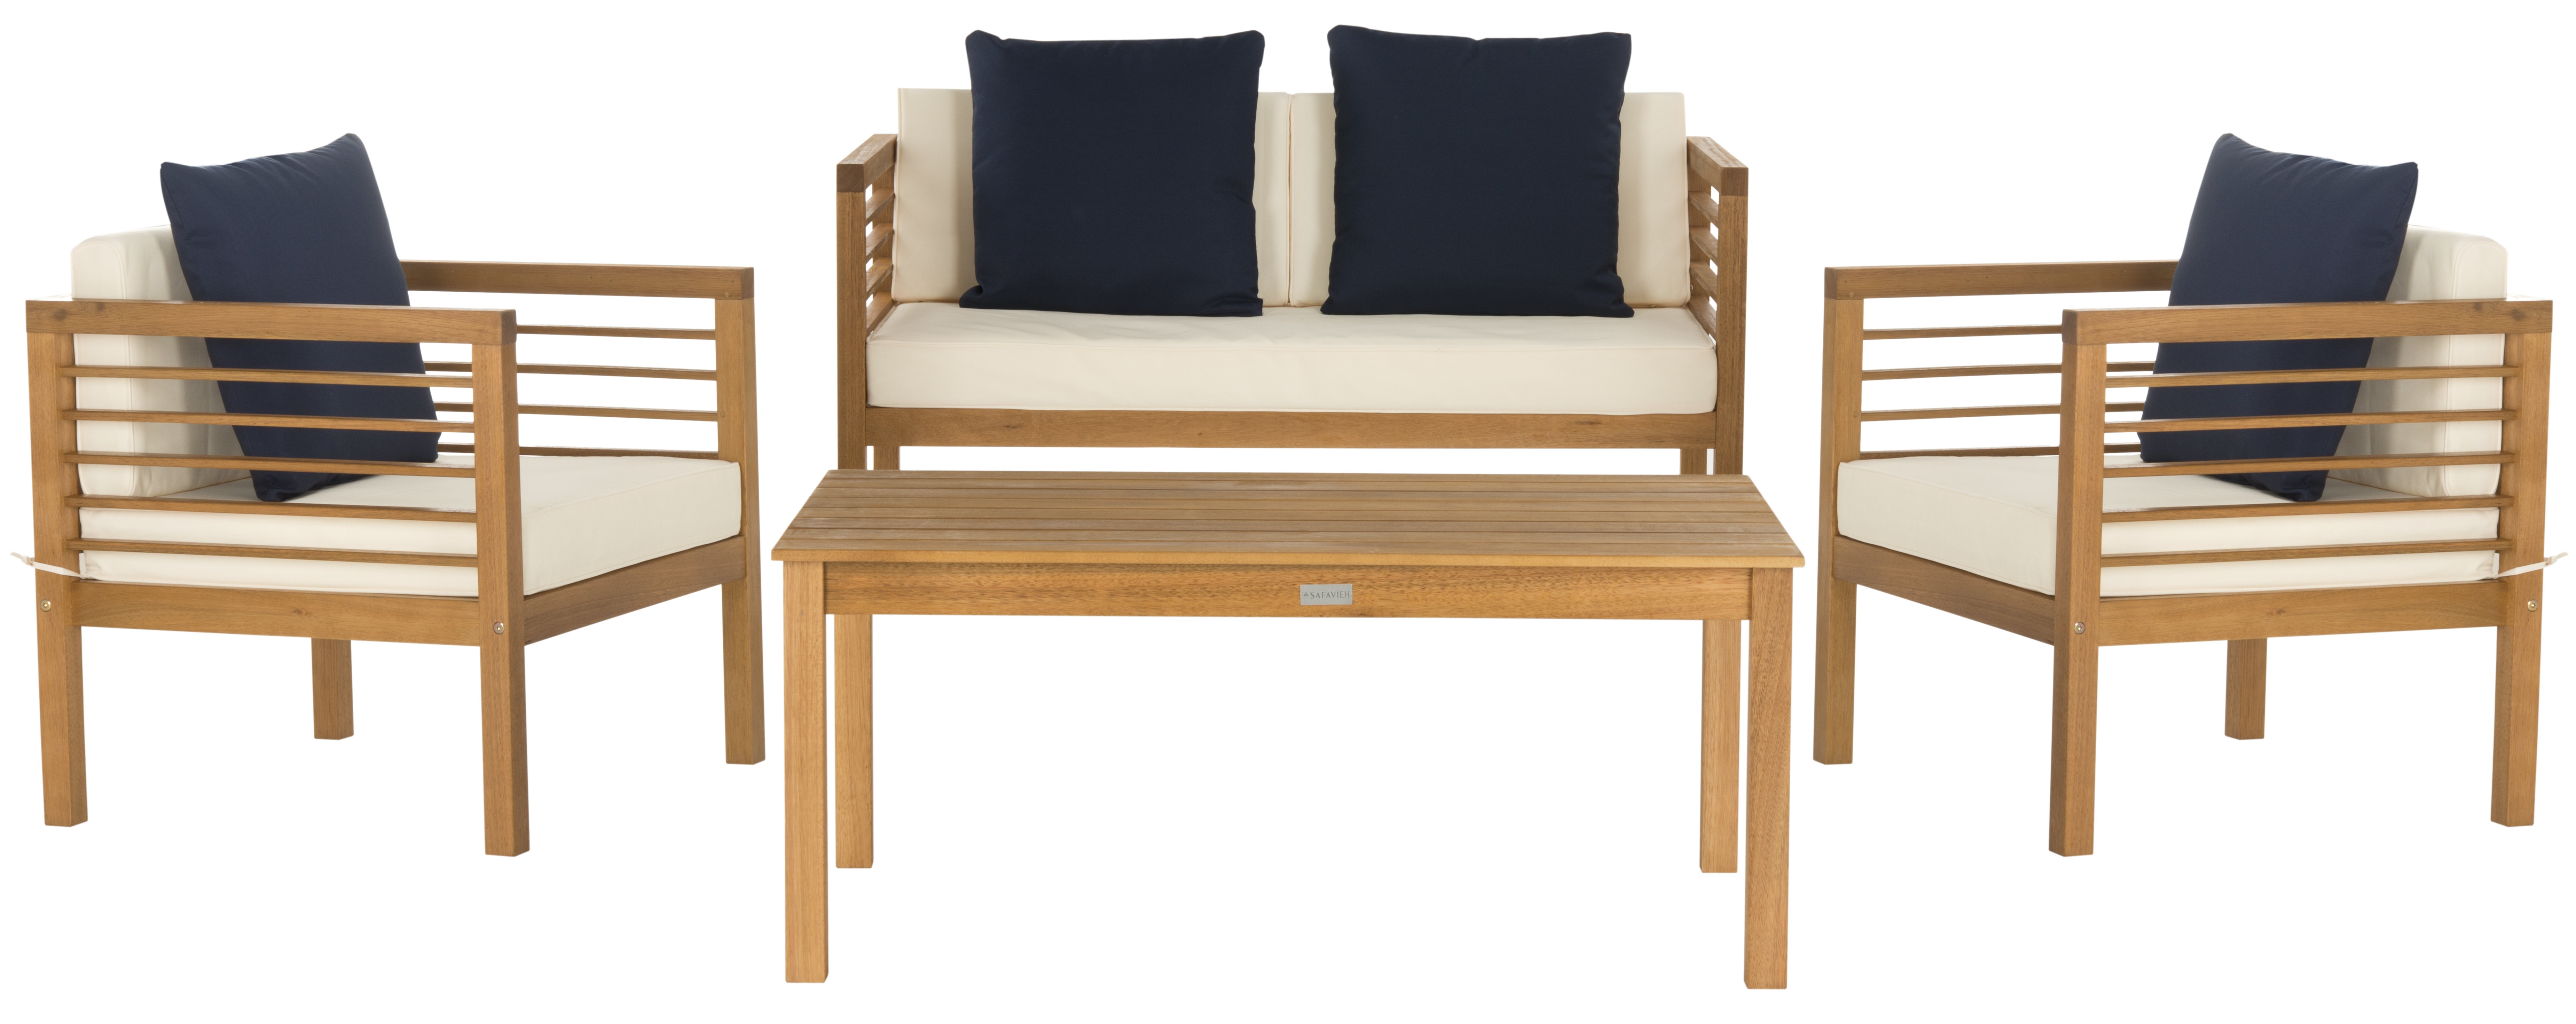 Alda 4 Piece Outdoor Set With Accent Pillows - Natural/White/Navy - Arlo Home - Arlo Home